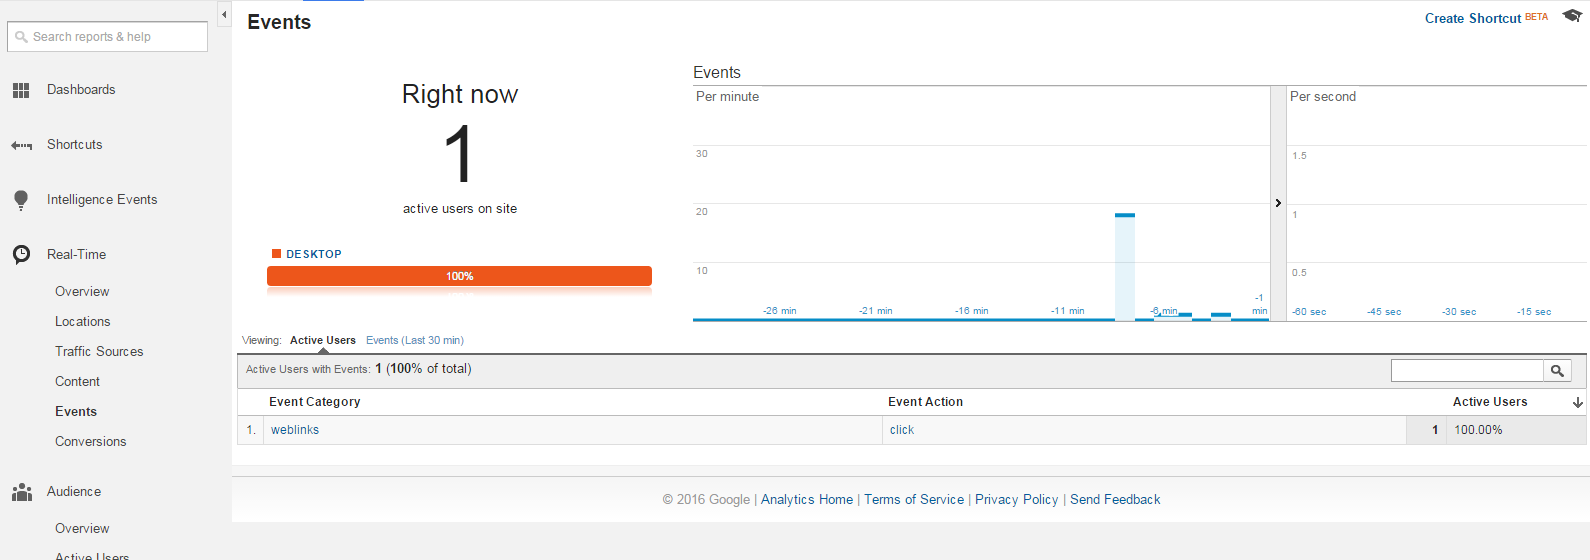 Google Analytics screenshot with Real-Time events data